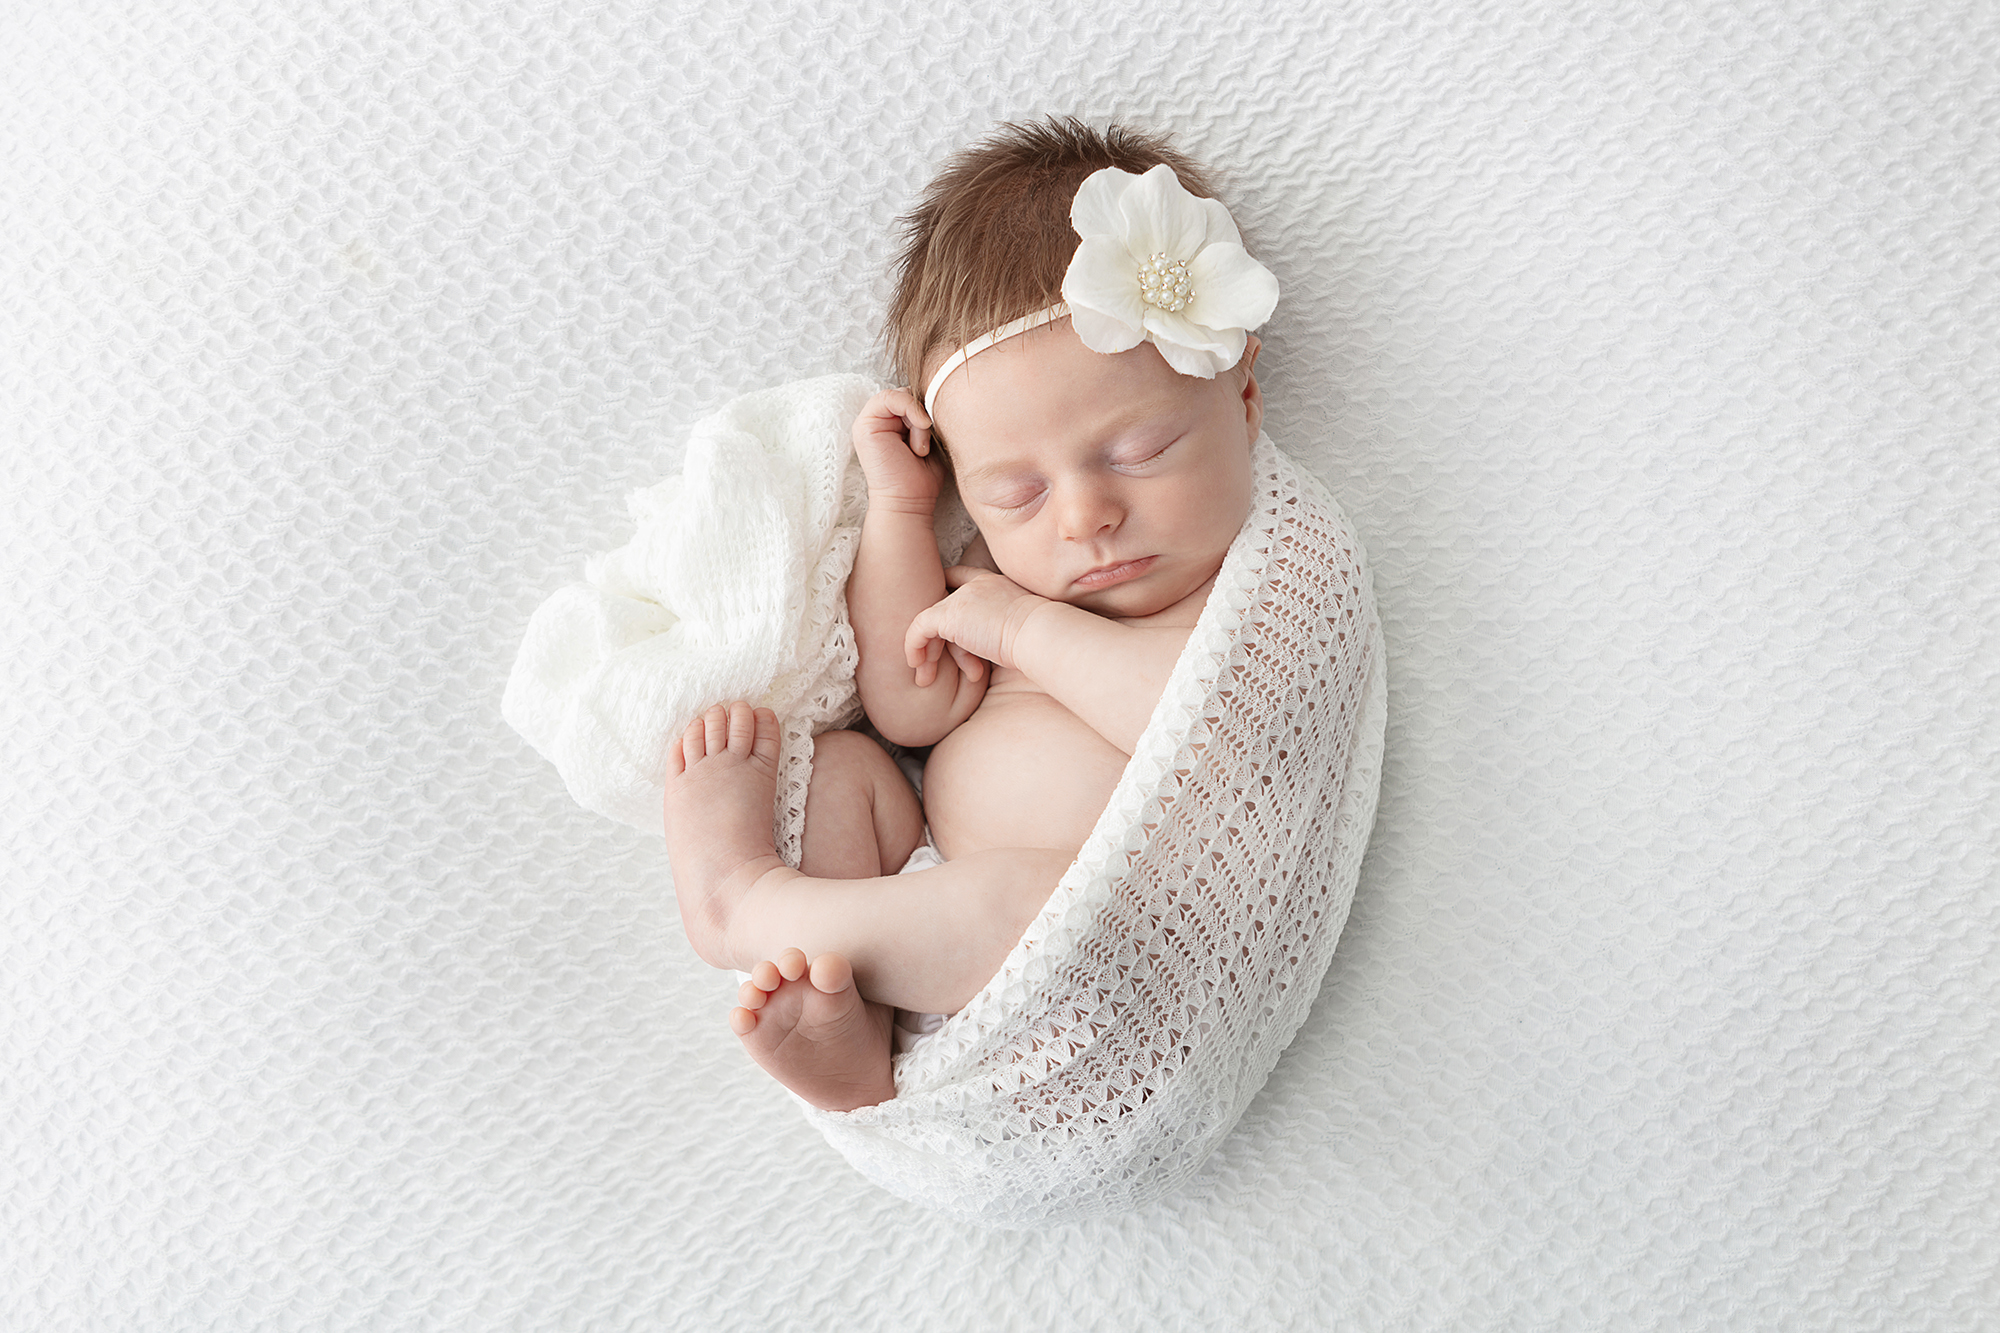 sleeping newborn with a head full of red hair wrapped in an open knit ivory blanket on a woven white background, baby wearing a big white flower headband with pearl flower center